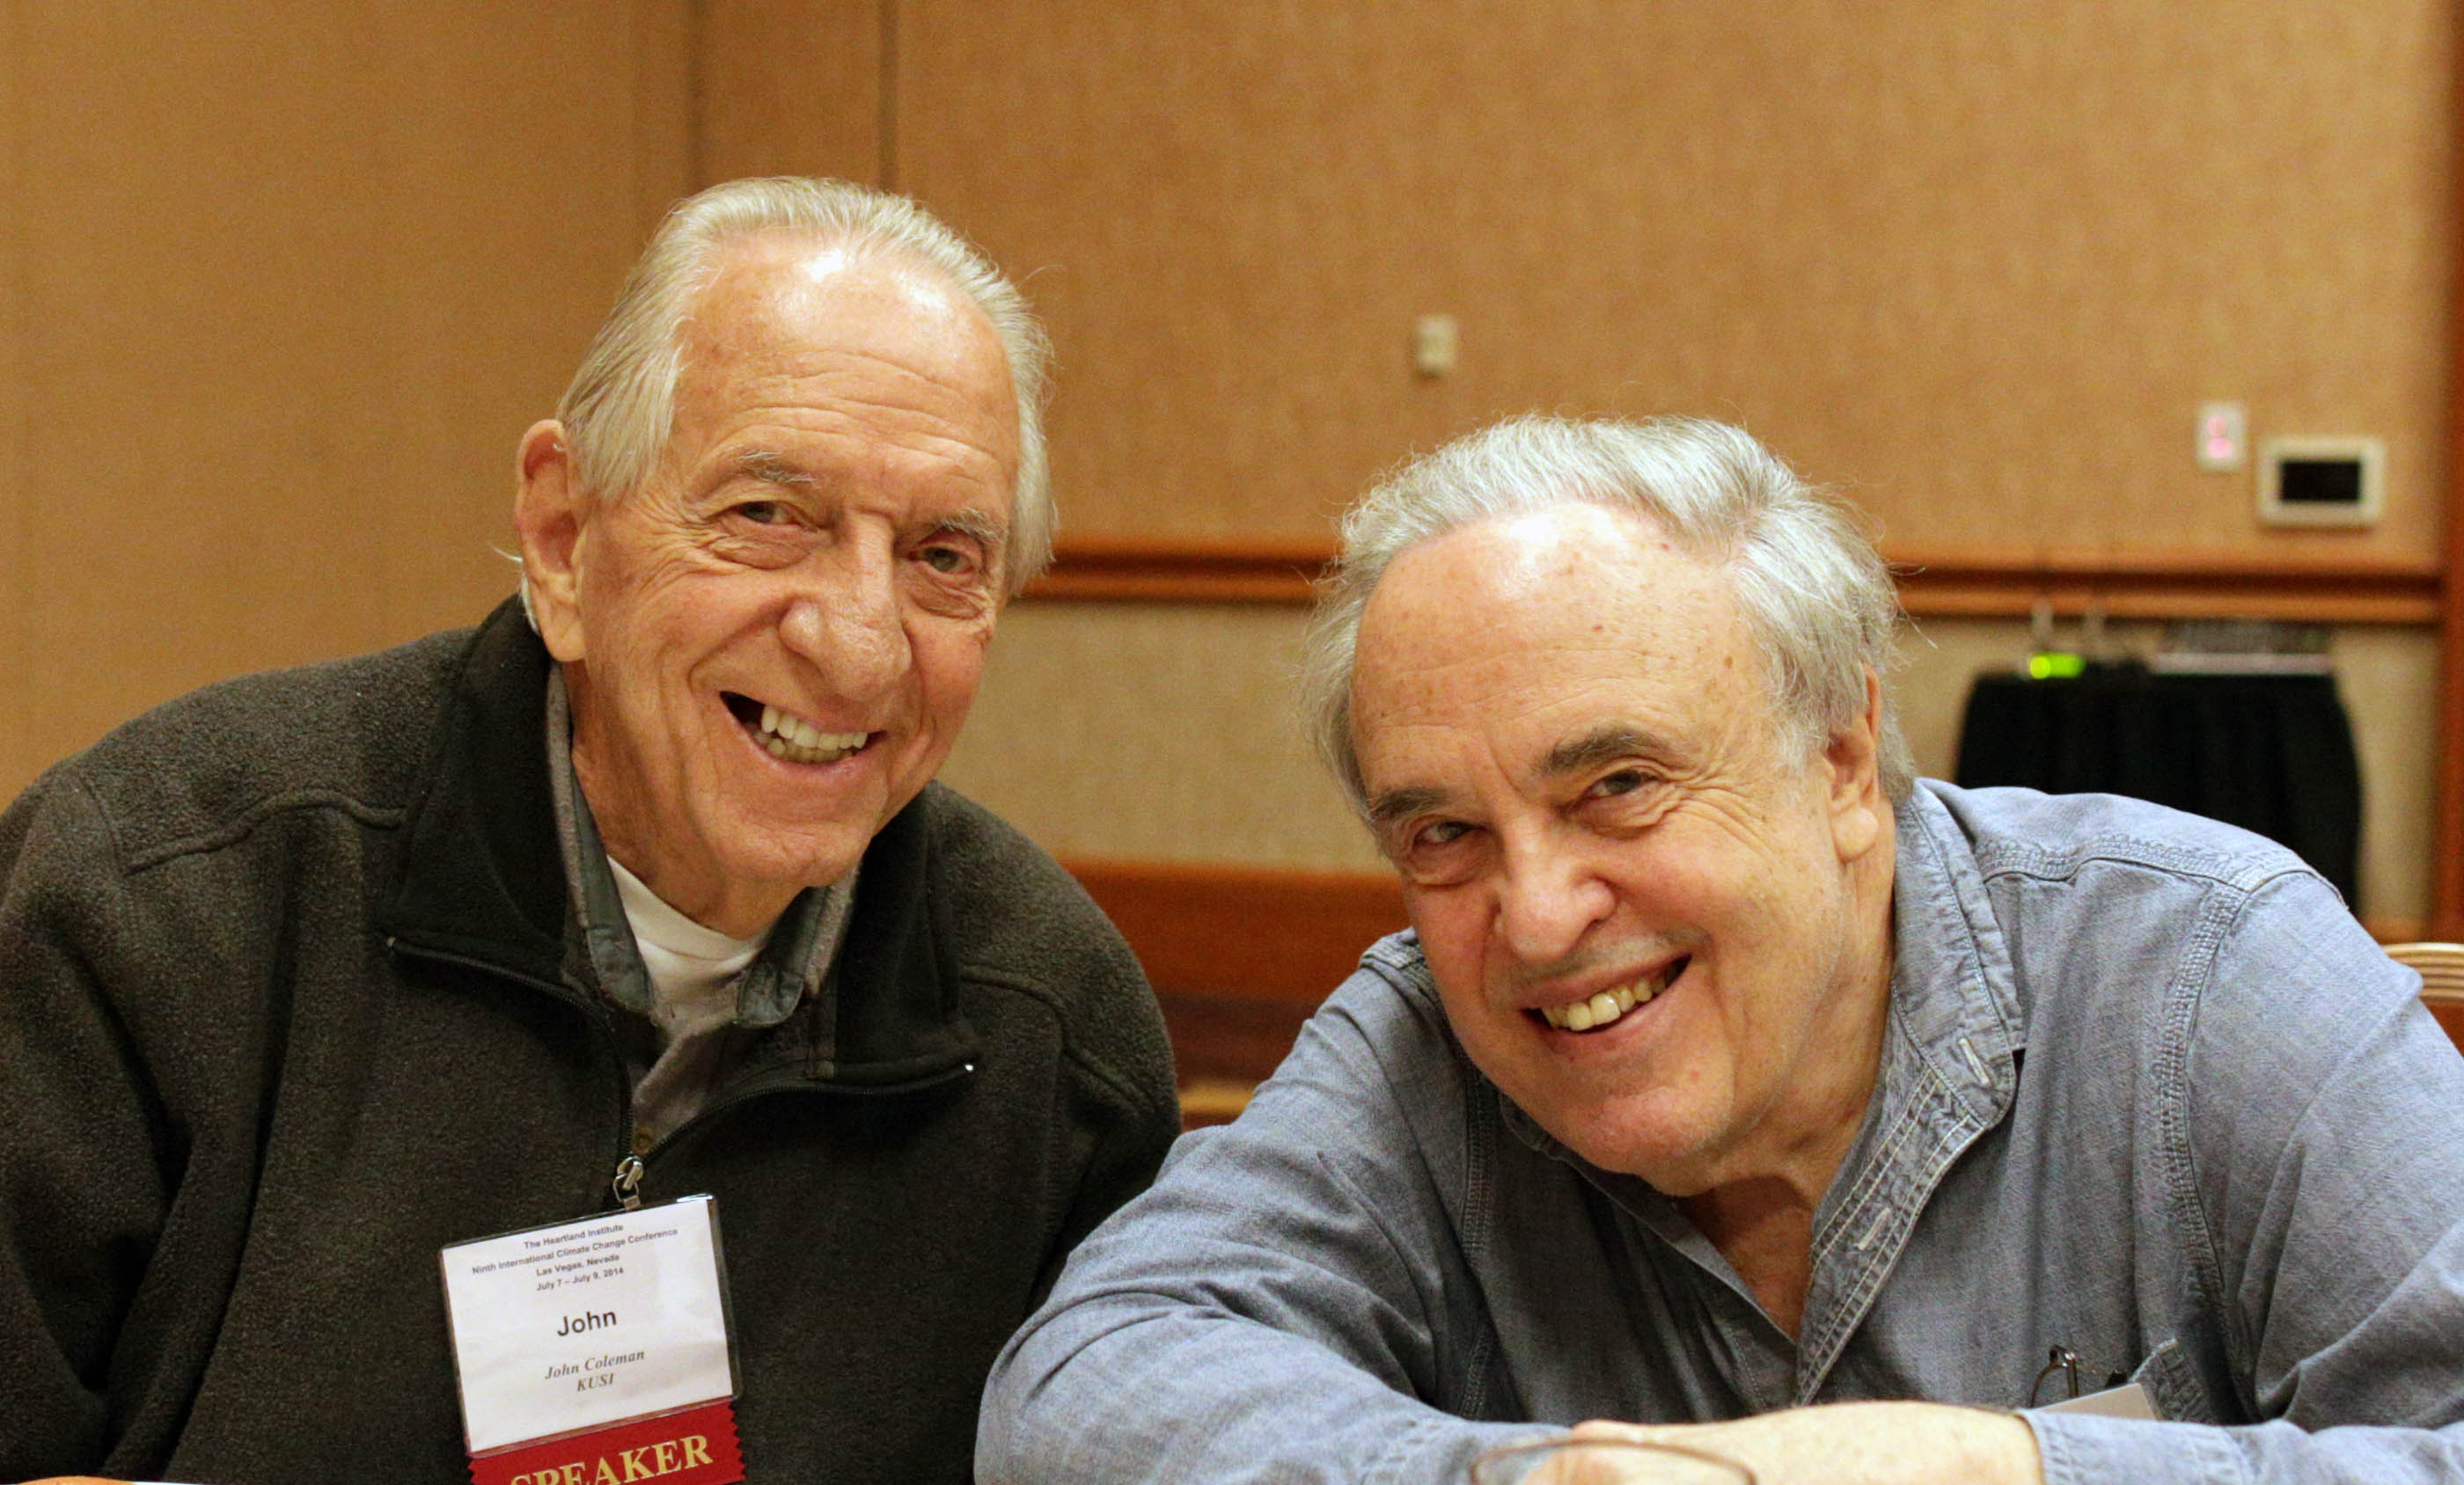 Weather Channel co-founders John Coleman and Joe D'Aleo